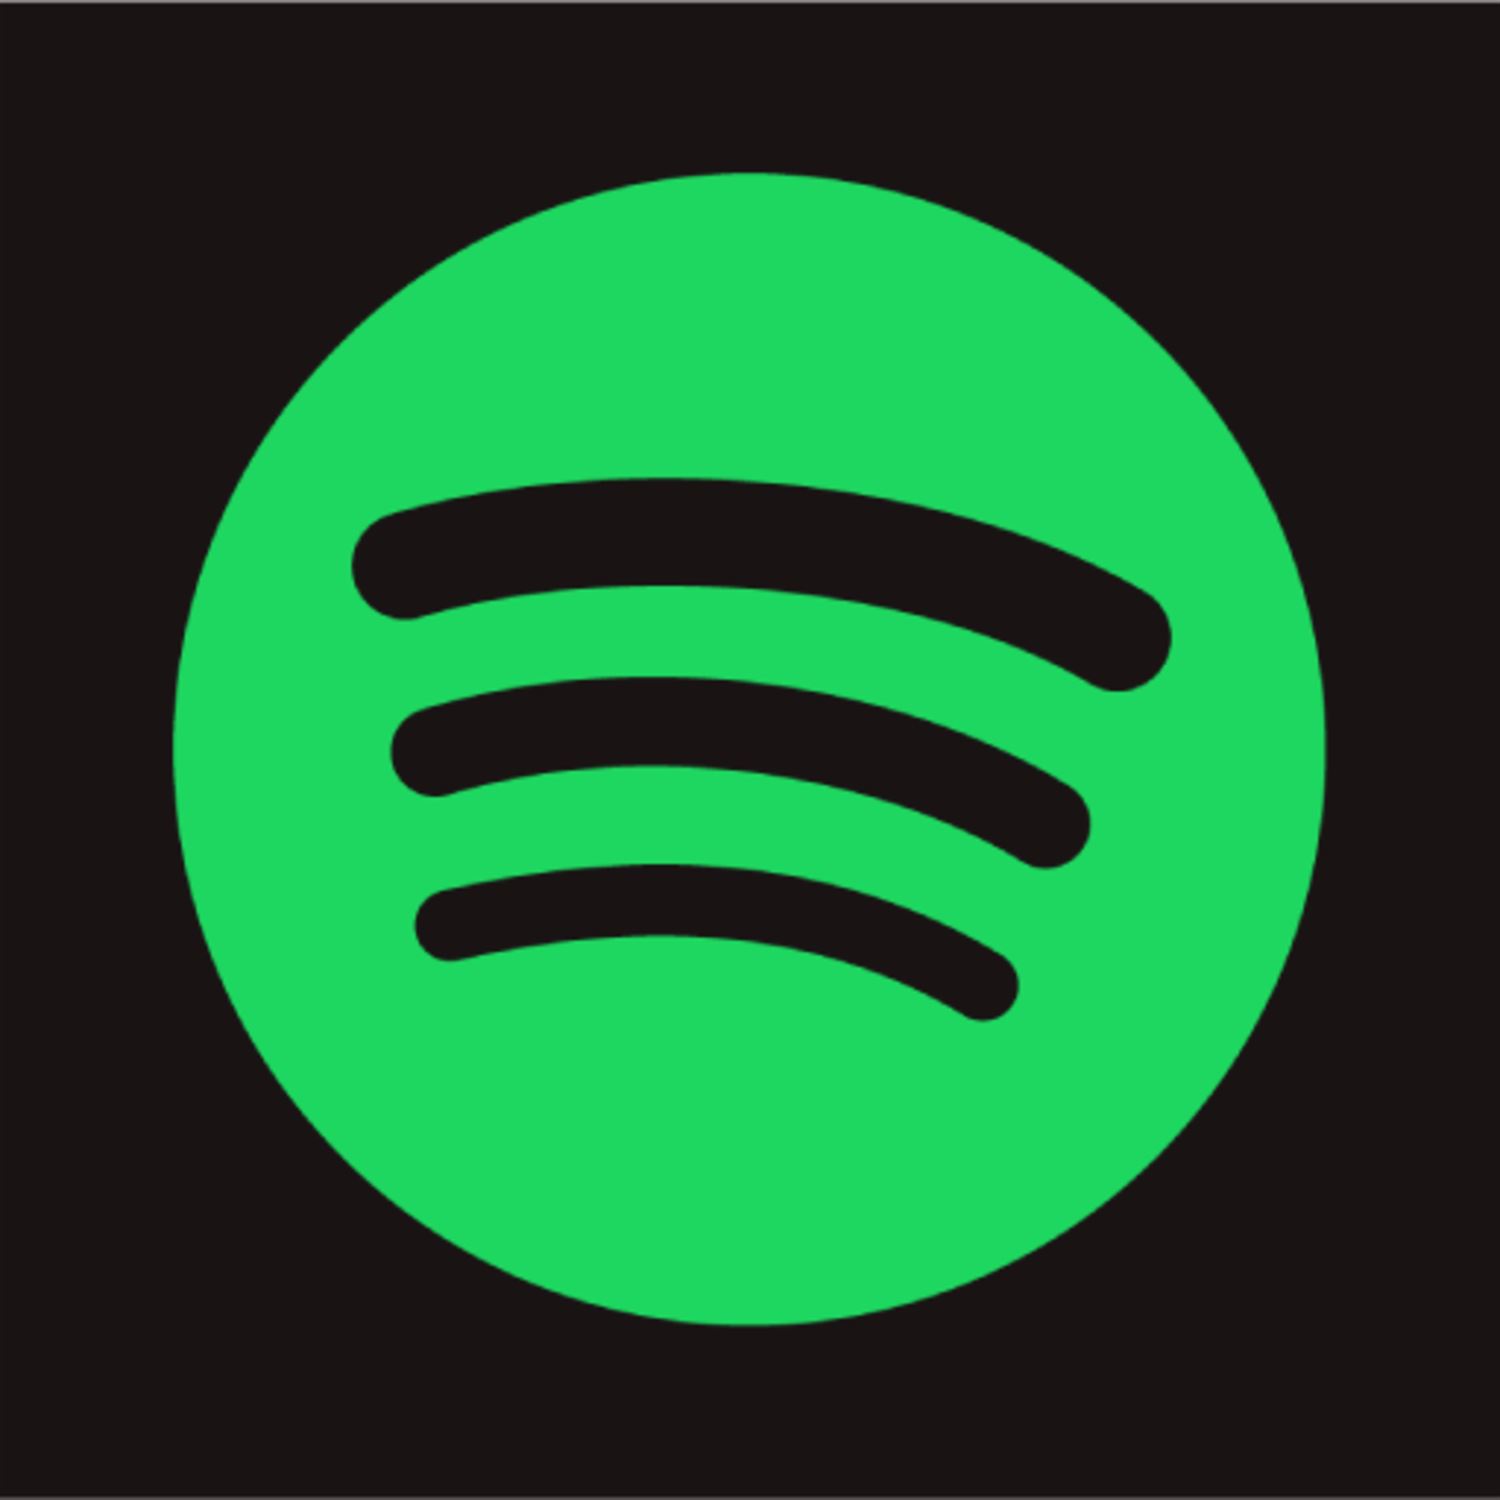 The downsides of Spotify